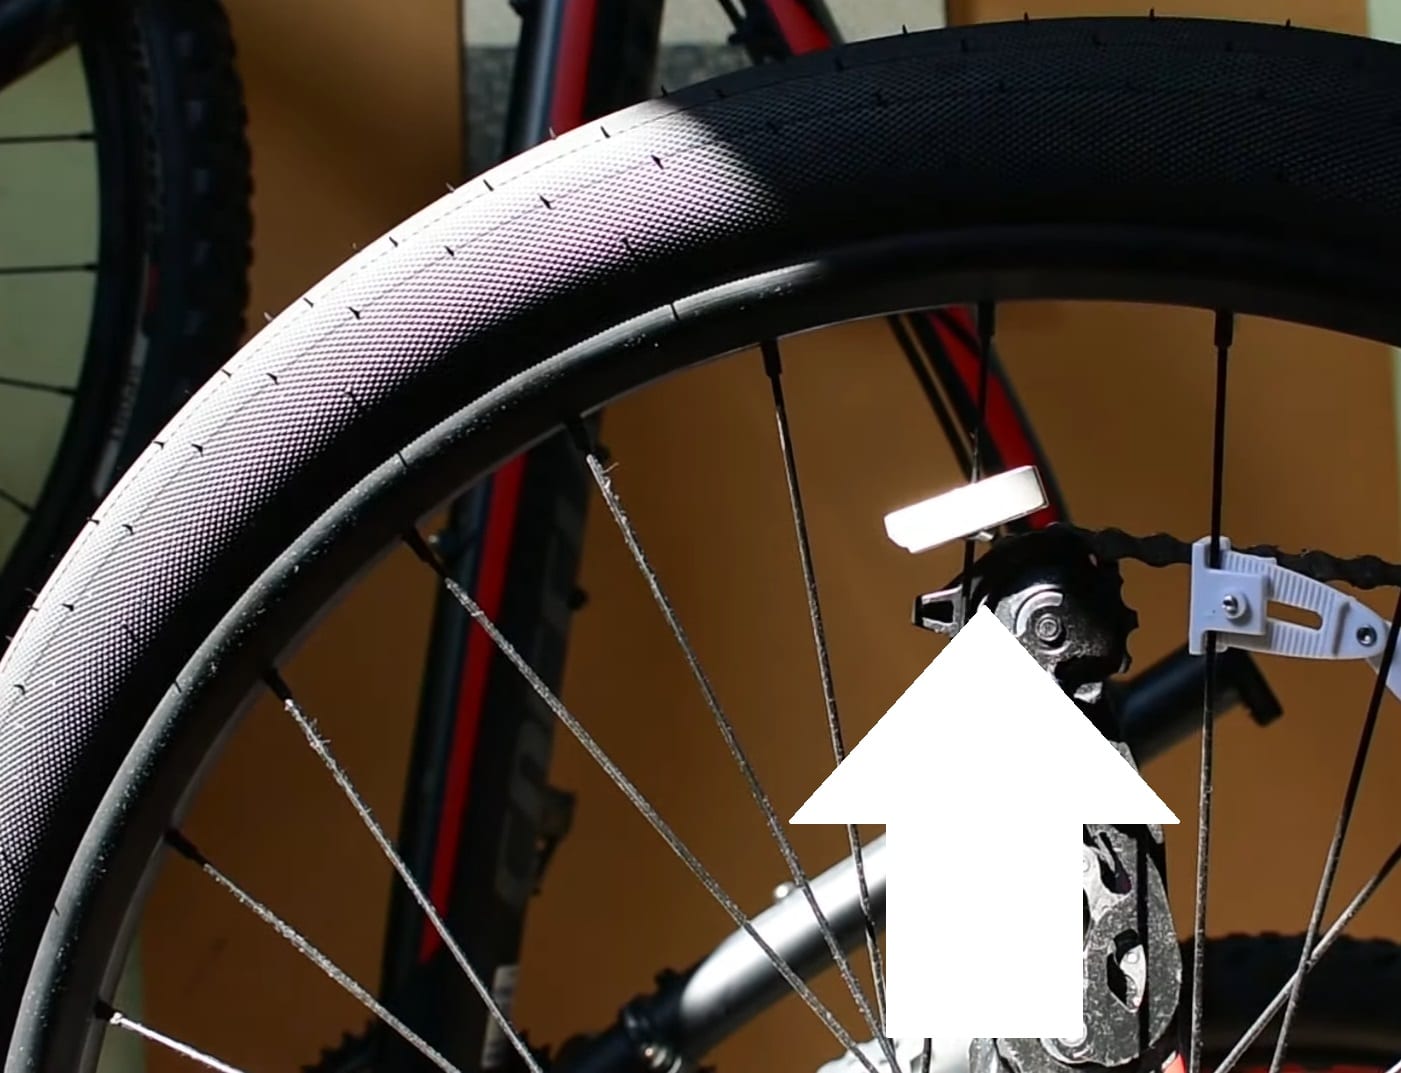 Put a piece of magnet on the magnet on the electric bike wheel to reflect the polarity of the magnet